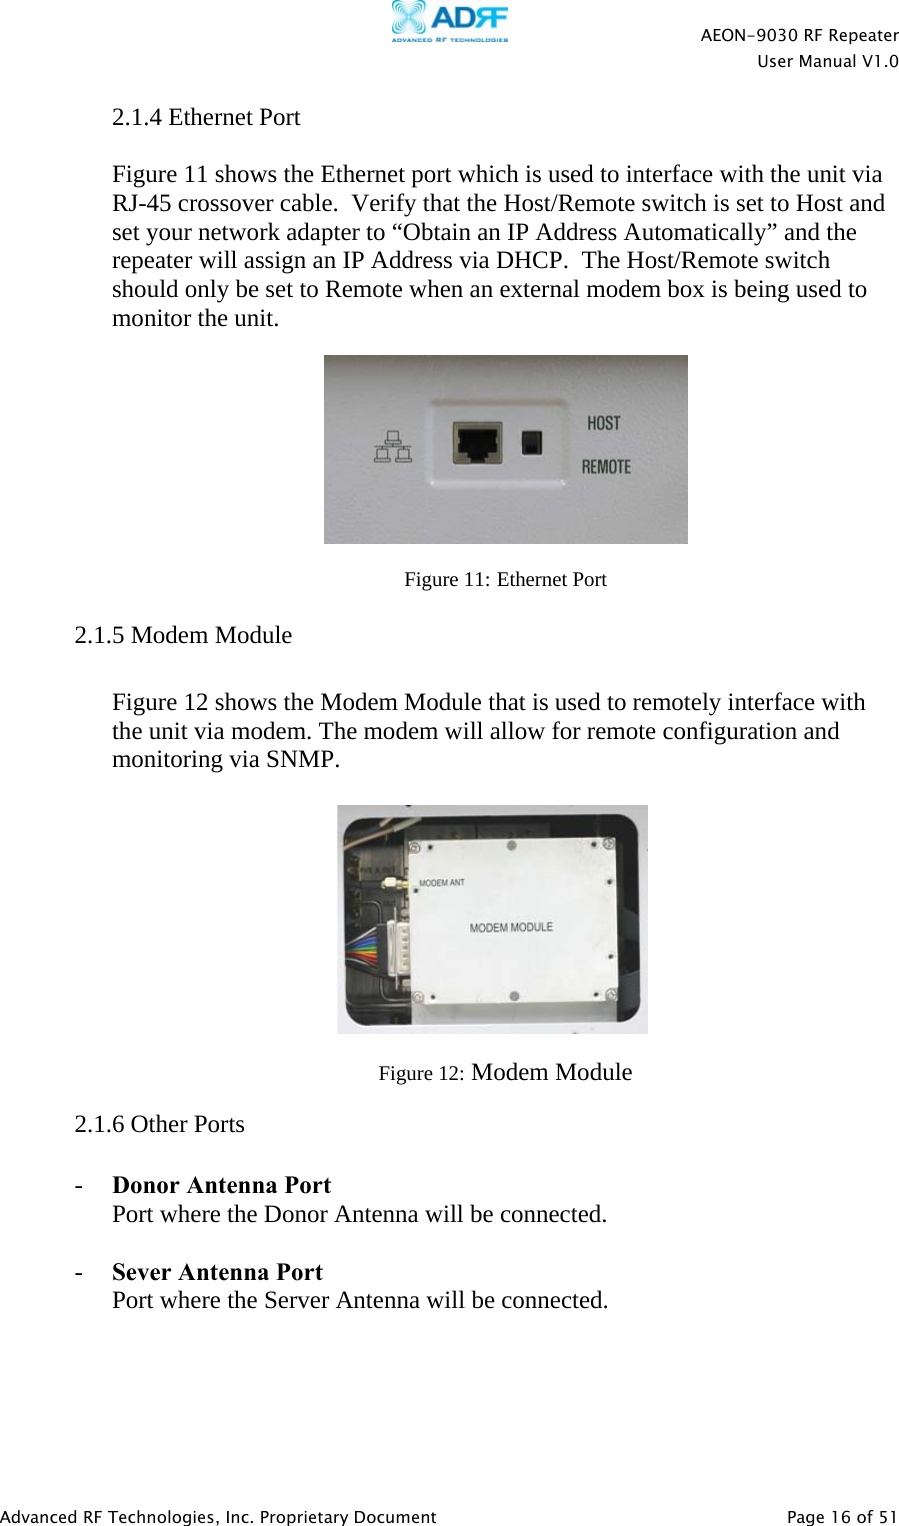    AEON-9030 RF Repeater  User Manual V1.0  Advanced RF Technologies, Inc. Proprietary Document   Page 16 of 51  2.1.4 Ethernet Port   Figure 11 shows the Ethernet port which is used to interface with the unit via RJ-45 crossover cable.  Verify that the Host/Remote switch is set to Host and set your network adapter to “Obtain an IP Address Automatically” and the repeater will assign an IP Address via DHCP.  The Host/Remote switch should only be set to Remote when an external modem box is being used to monitor the unit.    Figure 11: Ethernet Port   2.1.5 Modem Module  Figure 12 shows the Modem Module that is used to remotely interface with the unit via modem. The modem will allow for remote configuration and monitoring via SNMP.            Figure 12: Modem Module   2.1.6 Other Ports  - Donor Antenna Port Port where the Donor Antenna will be connected.  - Sever Antenna Port Port where the Server Antenna will be connected.  